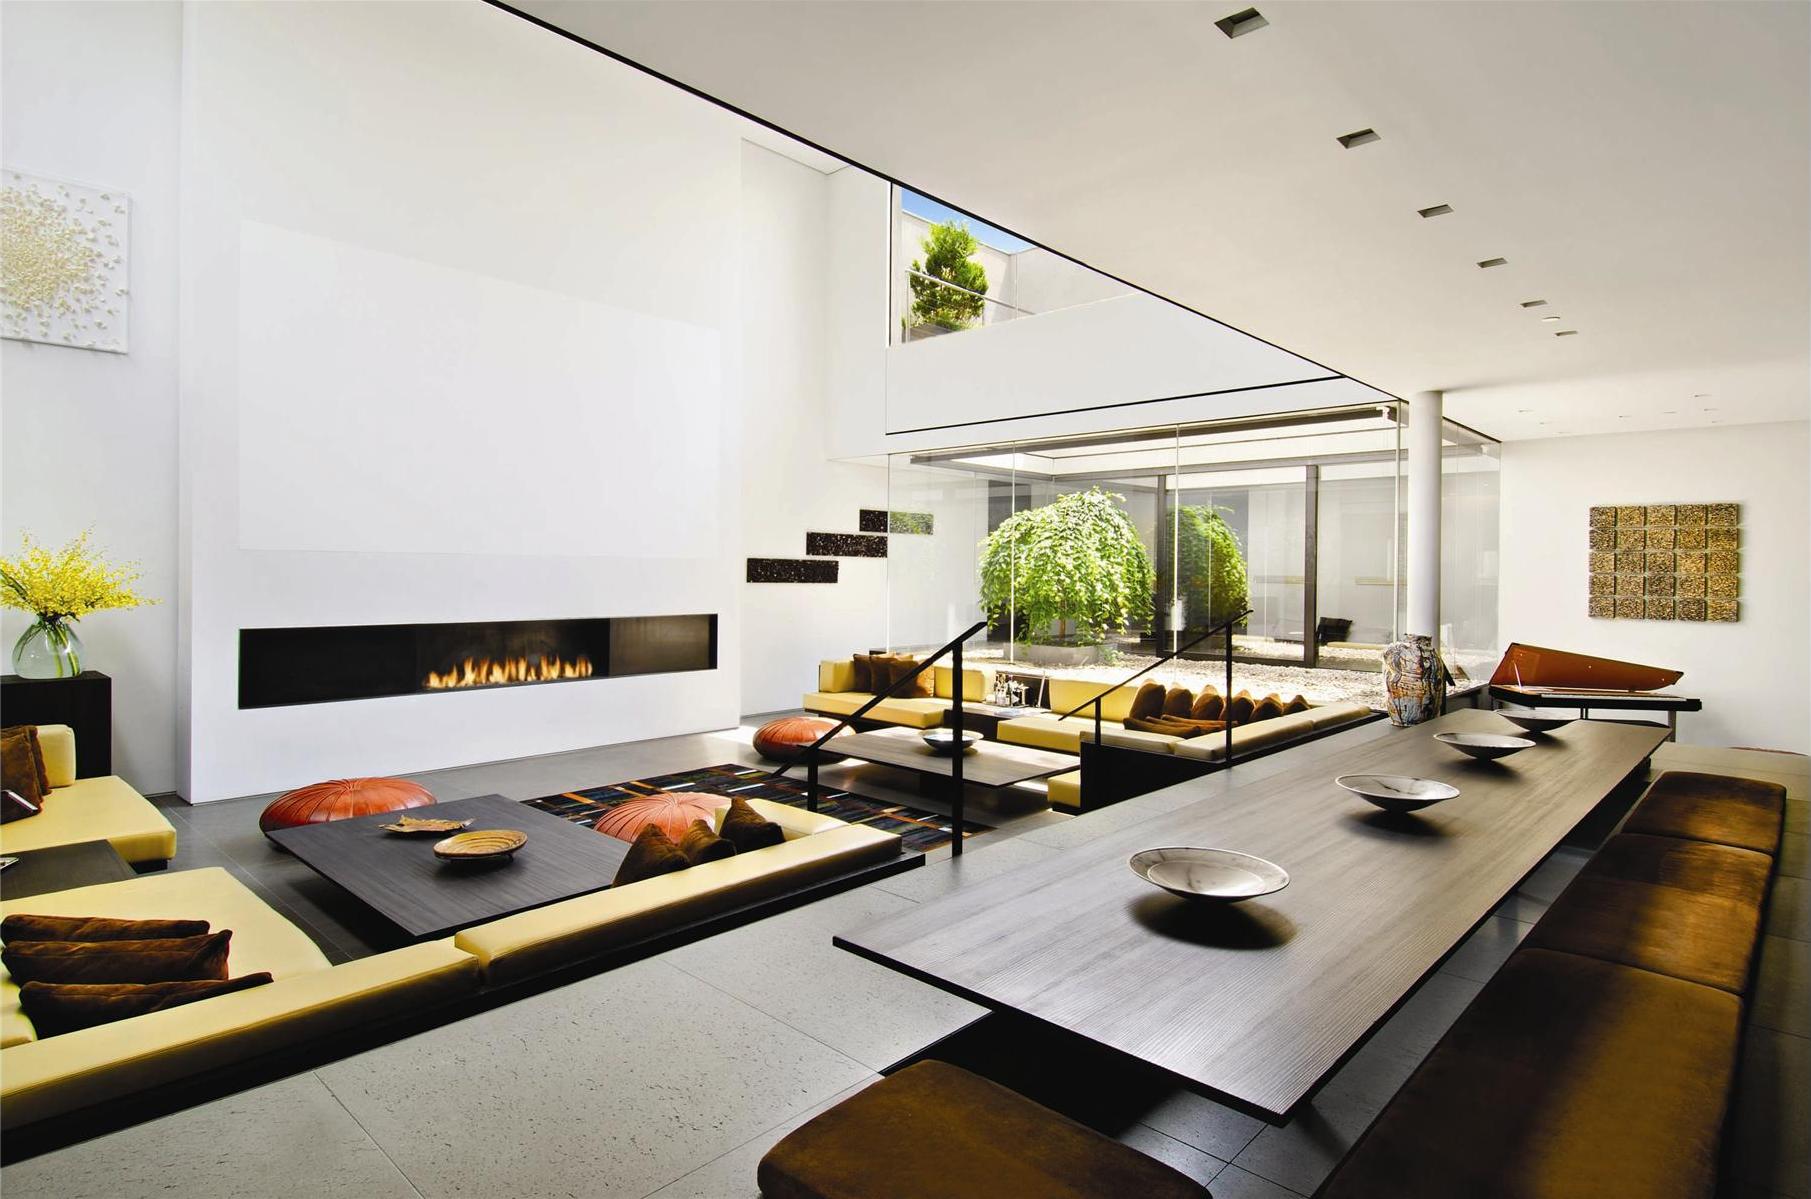 modern-living-room-of-penthouse-design-with-slim-wood-table-and-cool-fireplace-turns-in-white-wall.